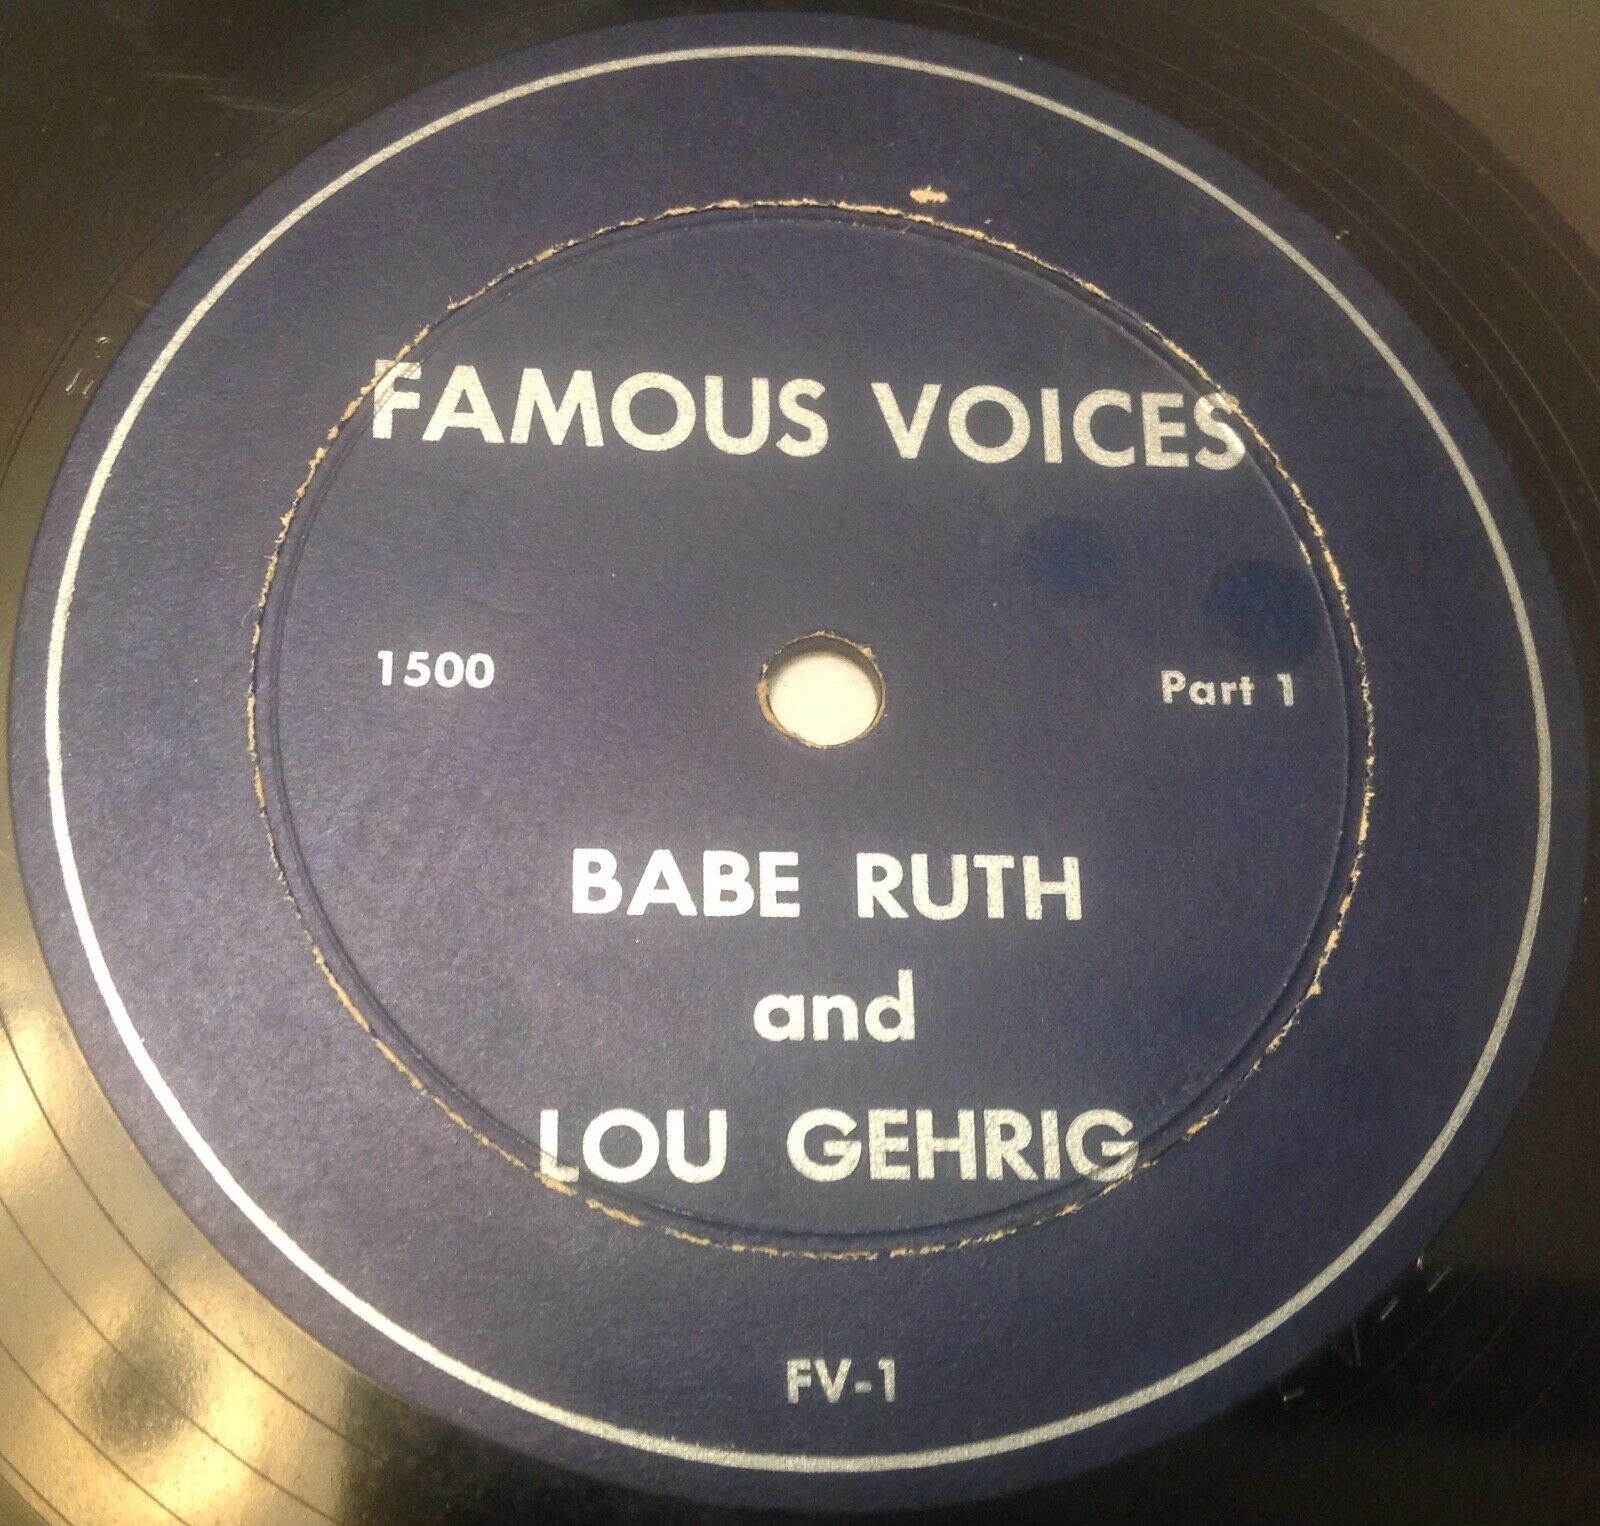 BABE RUTH LOU GEHRIG Home Run Twins 78 RPM FAMOUS VOICES